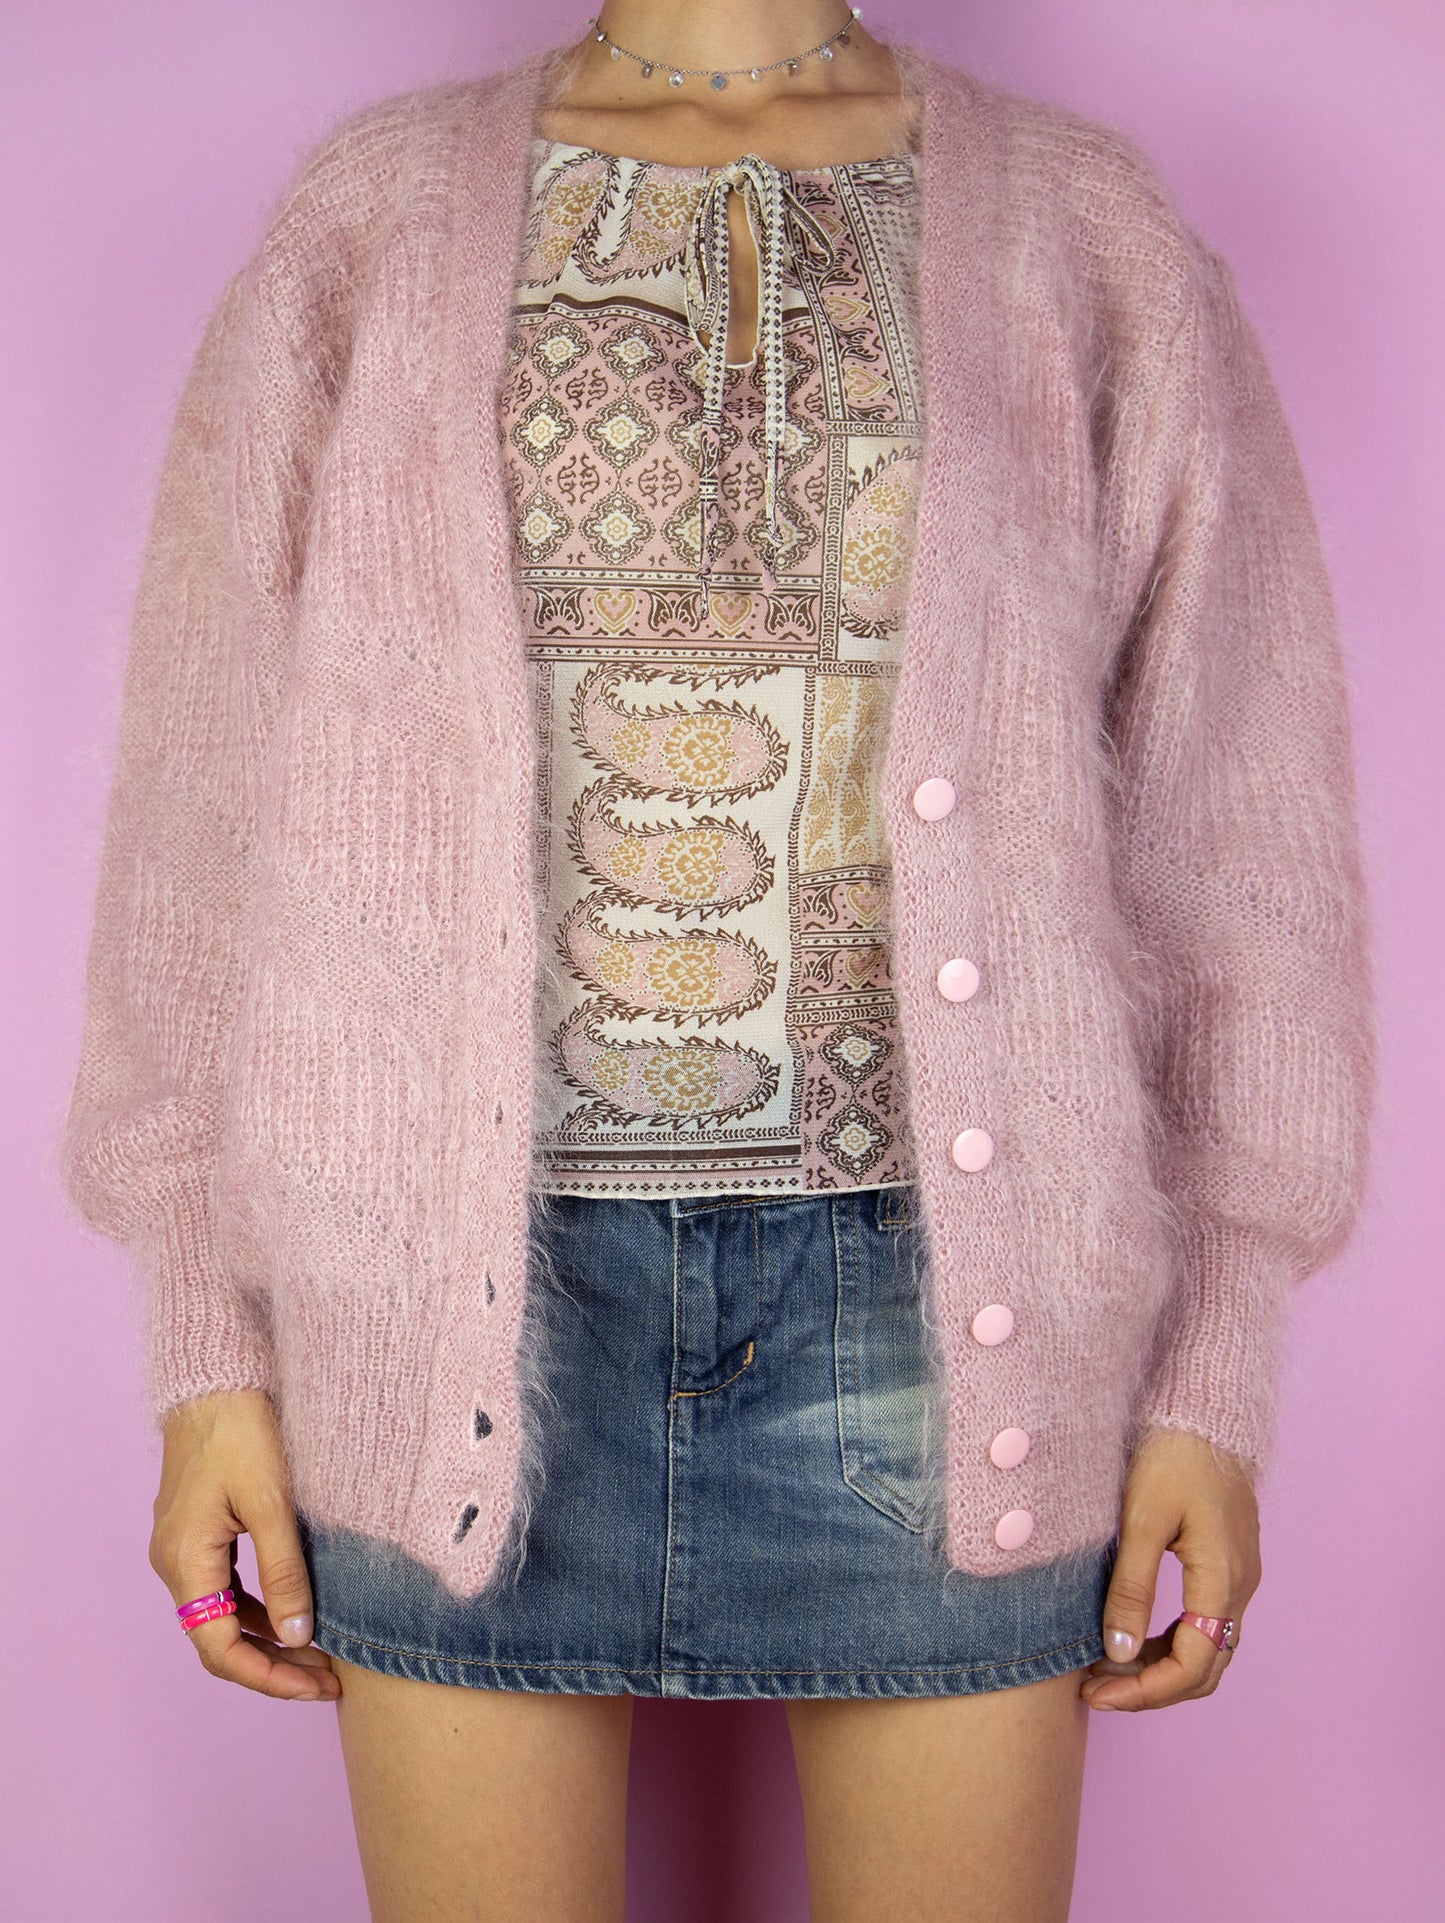 The Vintage 90s Pink Mohair Knit Cardigan is a light, dusty pink mohair blend cardigan with buttons. Romantic boho retro 1990s wool sweater.